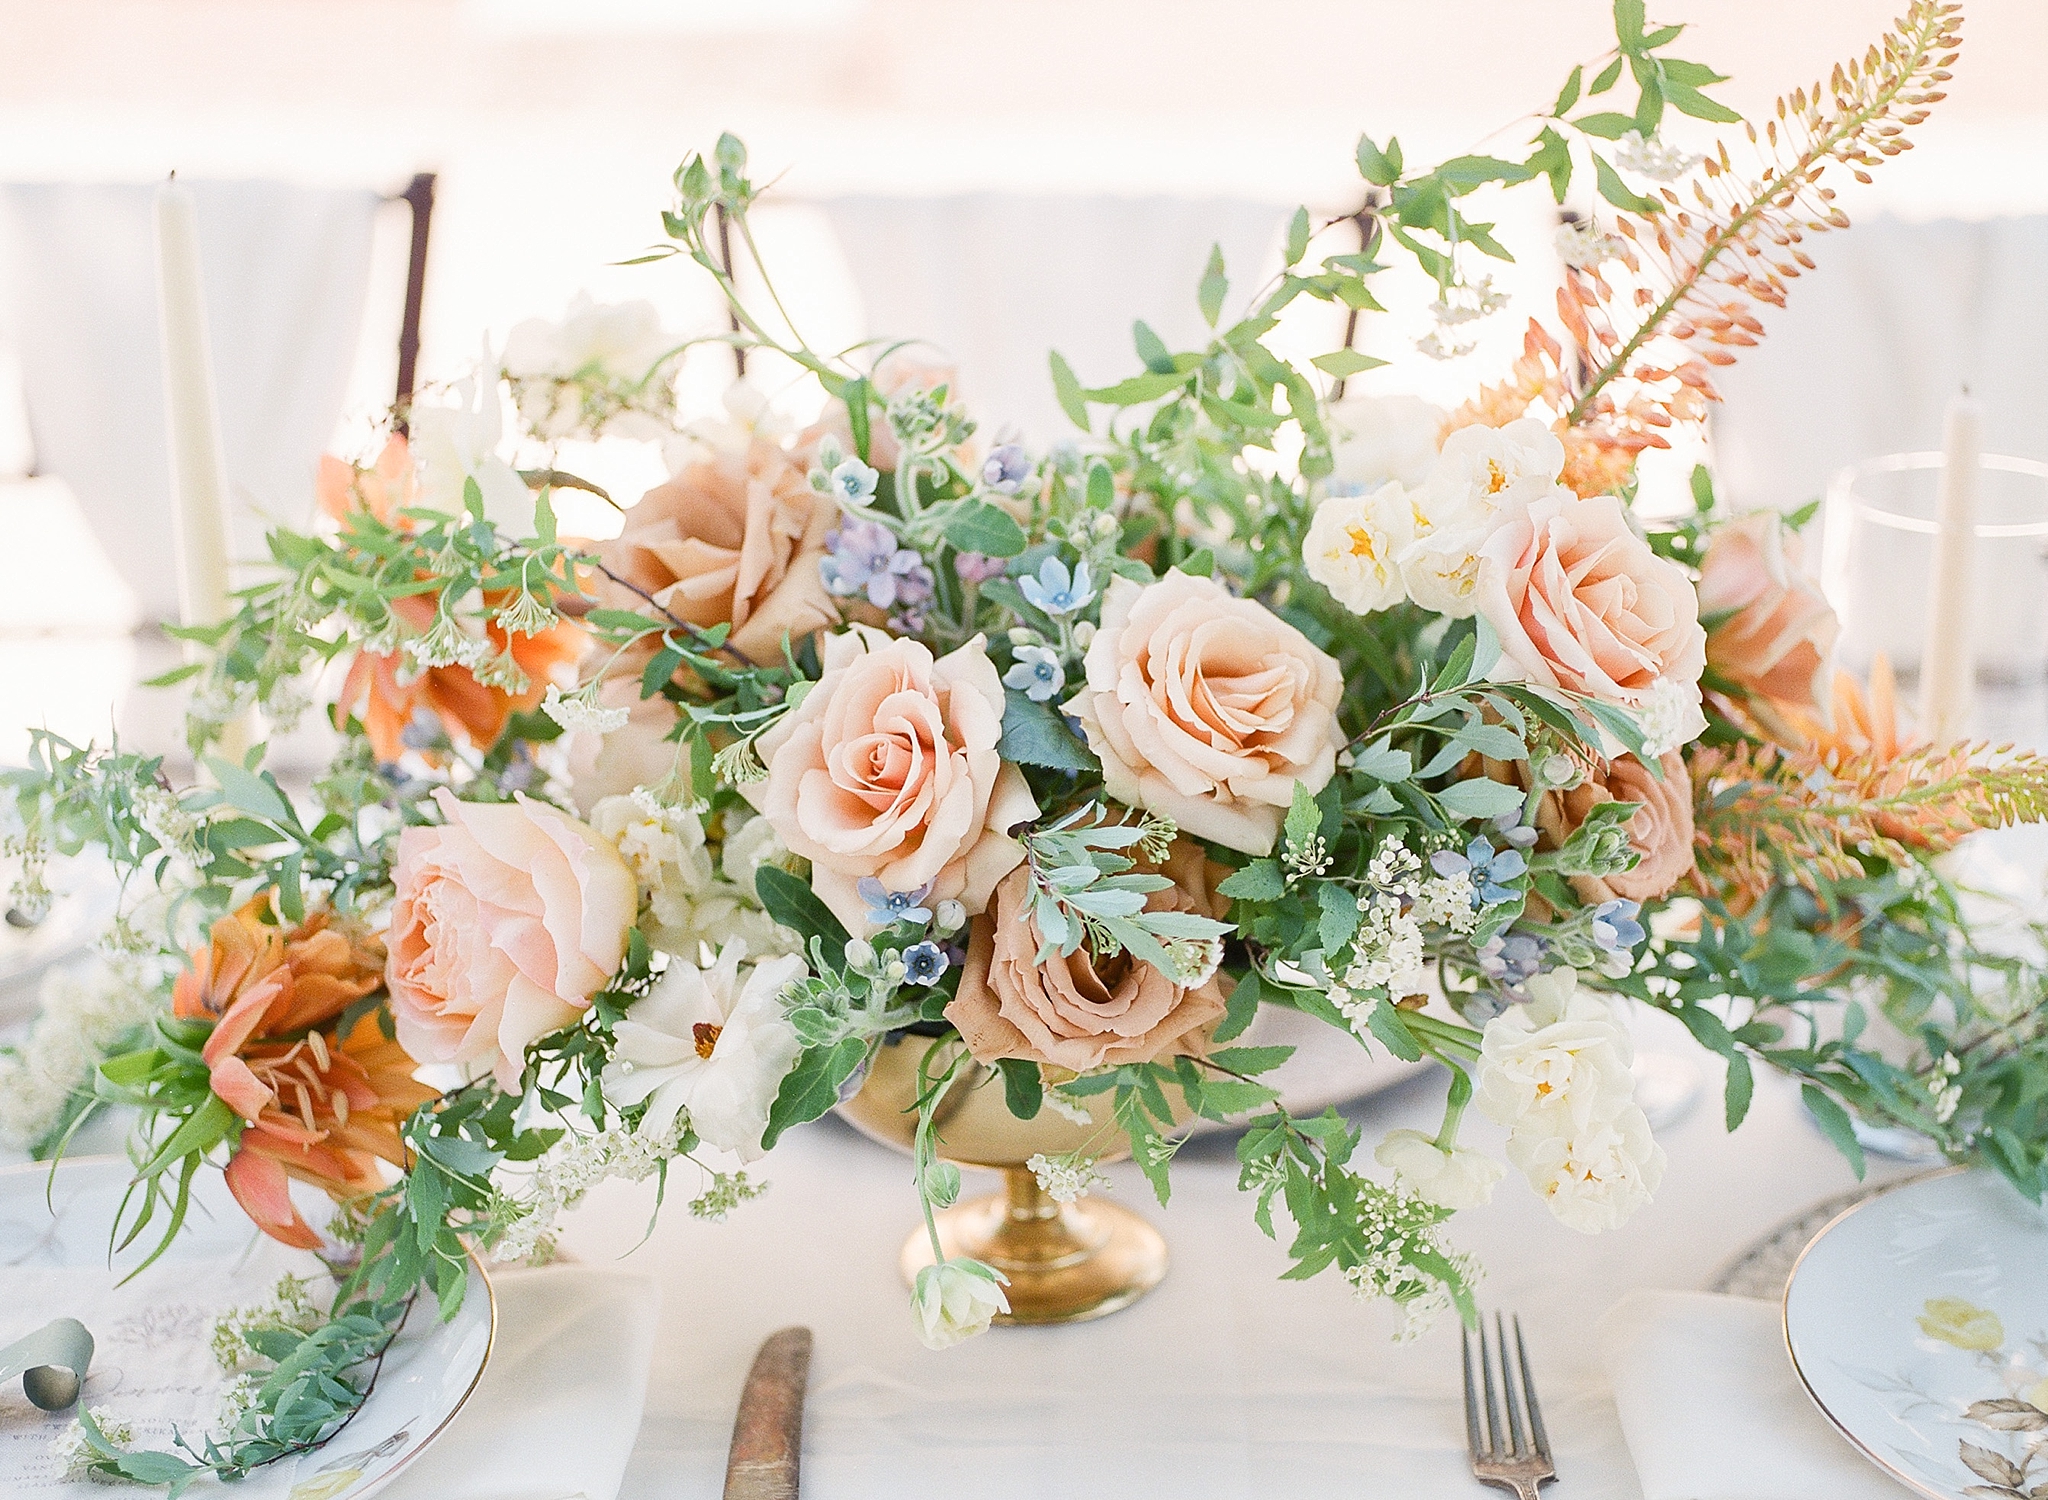 A stunning garden wedding at Oatlands Historic House in Leesburg, VA features a soft autumnal theme as a nod to the season.